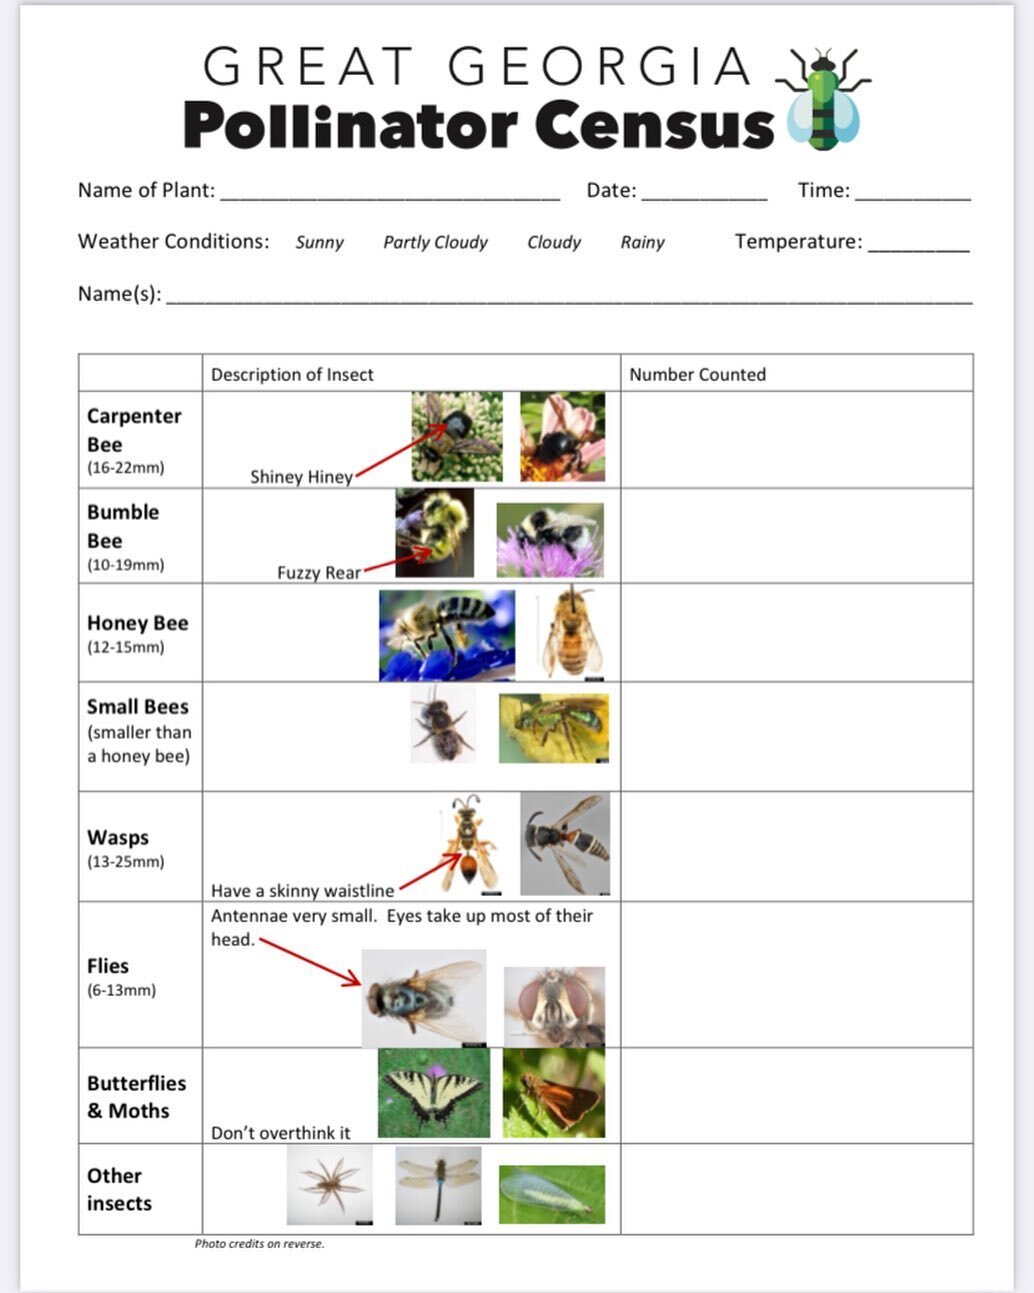 We will be counting at the farm and the store TOMORROW! Get ready to count your #pollinators Friday and Saturday- download this PDF @ link in bio // POLLINATOR CENSUS COUNTING SHEET 

PS: If it&rsquo;s too rainy to count, the alternate dates for the 